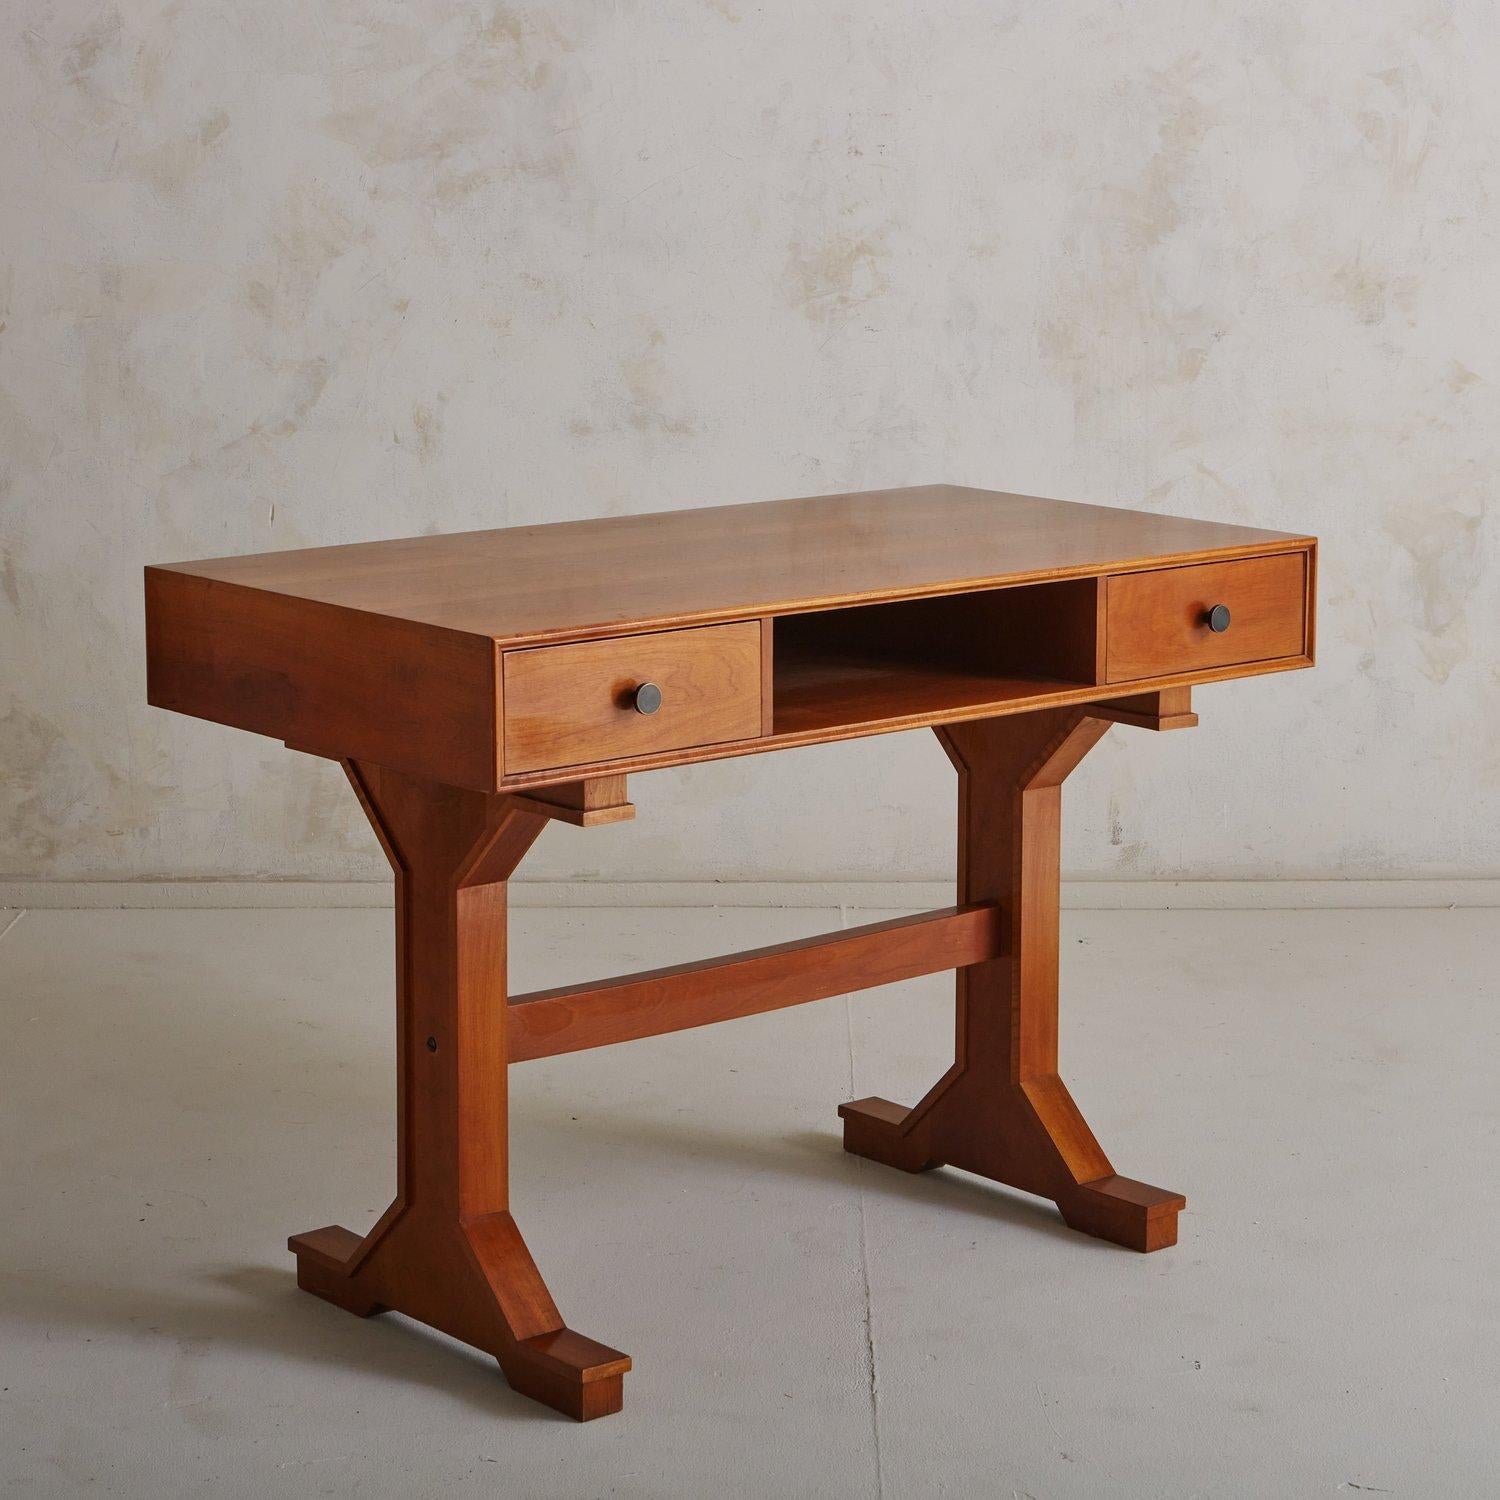 An elegant vintage Italian writing desk by Gianfranco Frattini. This desk was constructed with rosewood and features angular, clean lines. It has two drawers with round metal pulls and an open central space for additional storage. The rectangular